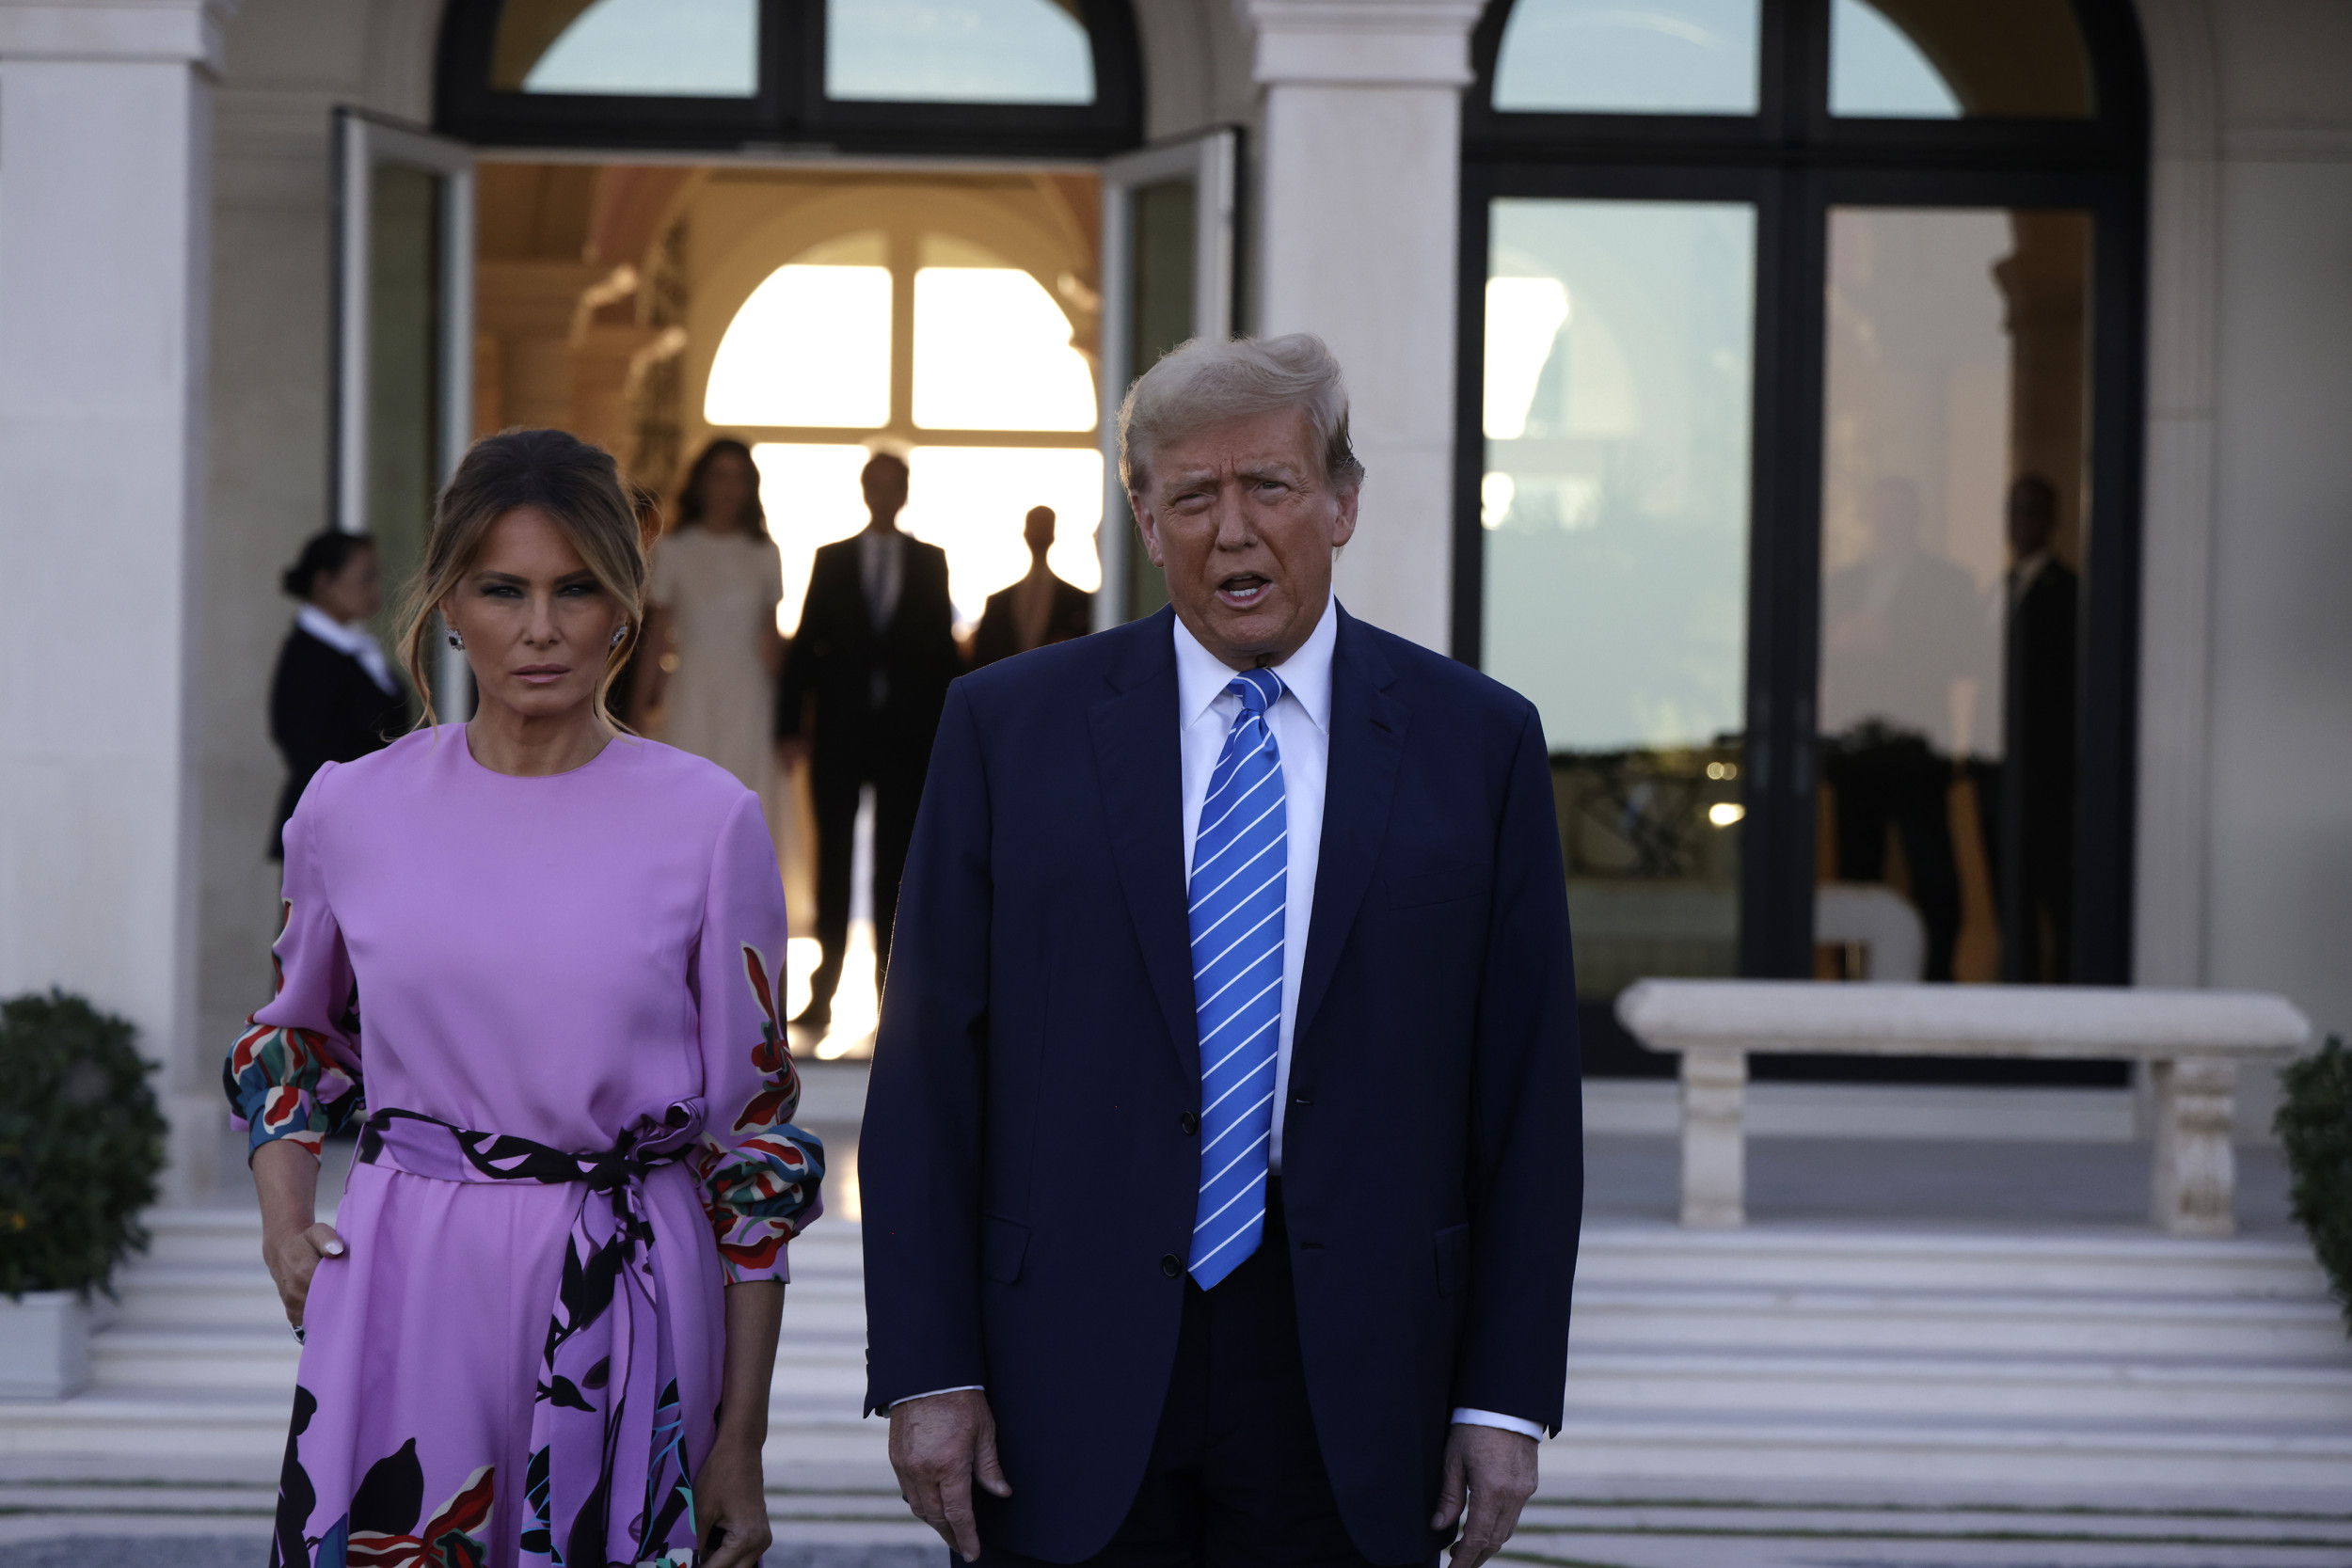 Melania's Appearance With Donald Trump Sparks Mockery: 'Checking the Clock'